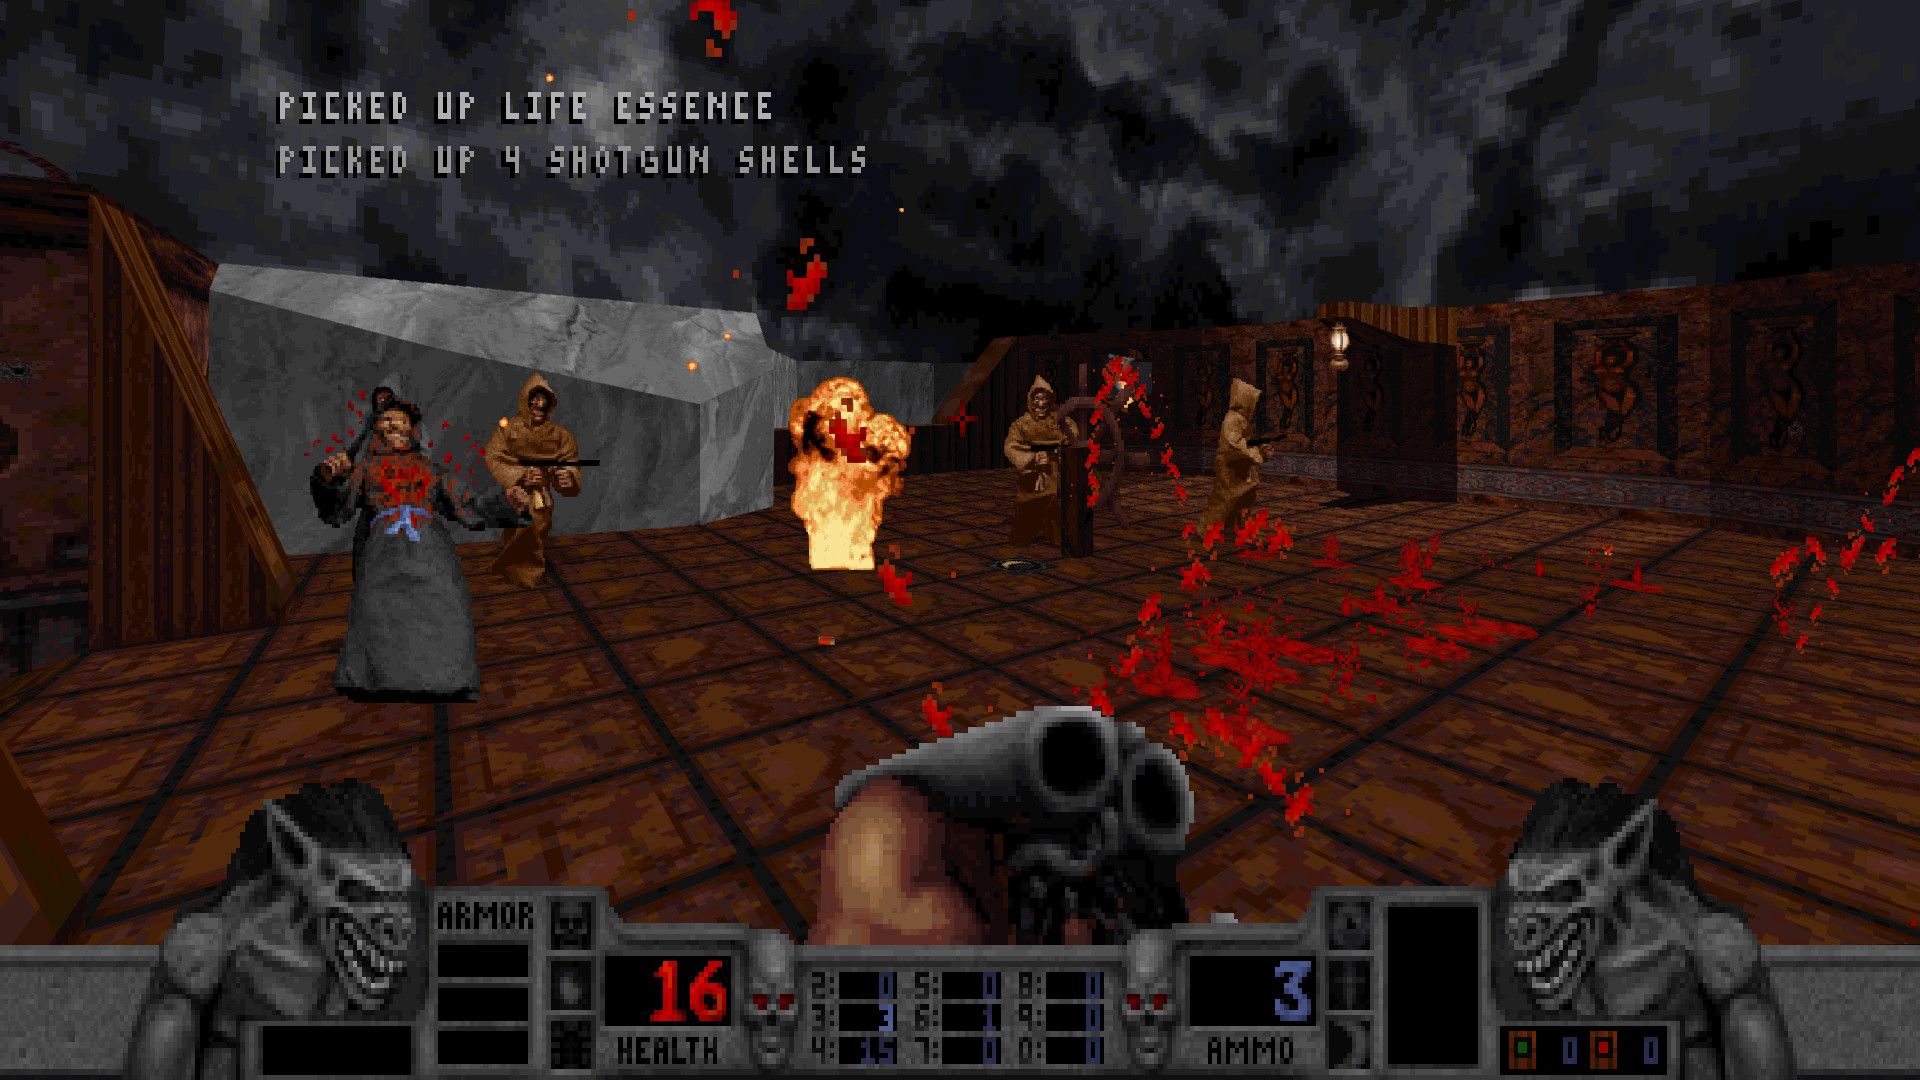 Blood 1997 player reloading a shotgun surrounded by enemies, one of which is on fire